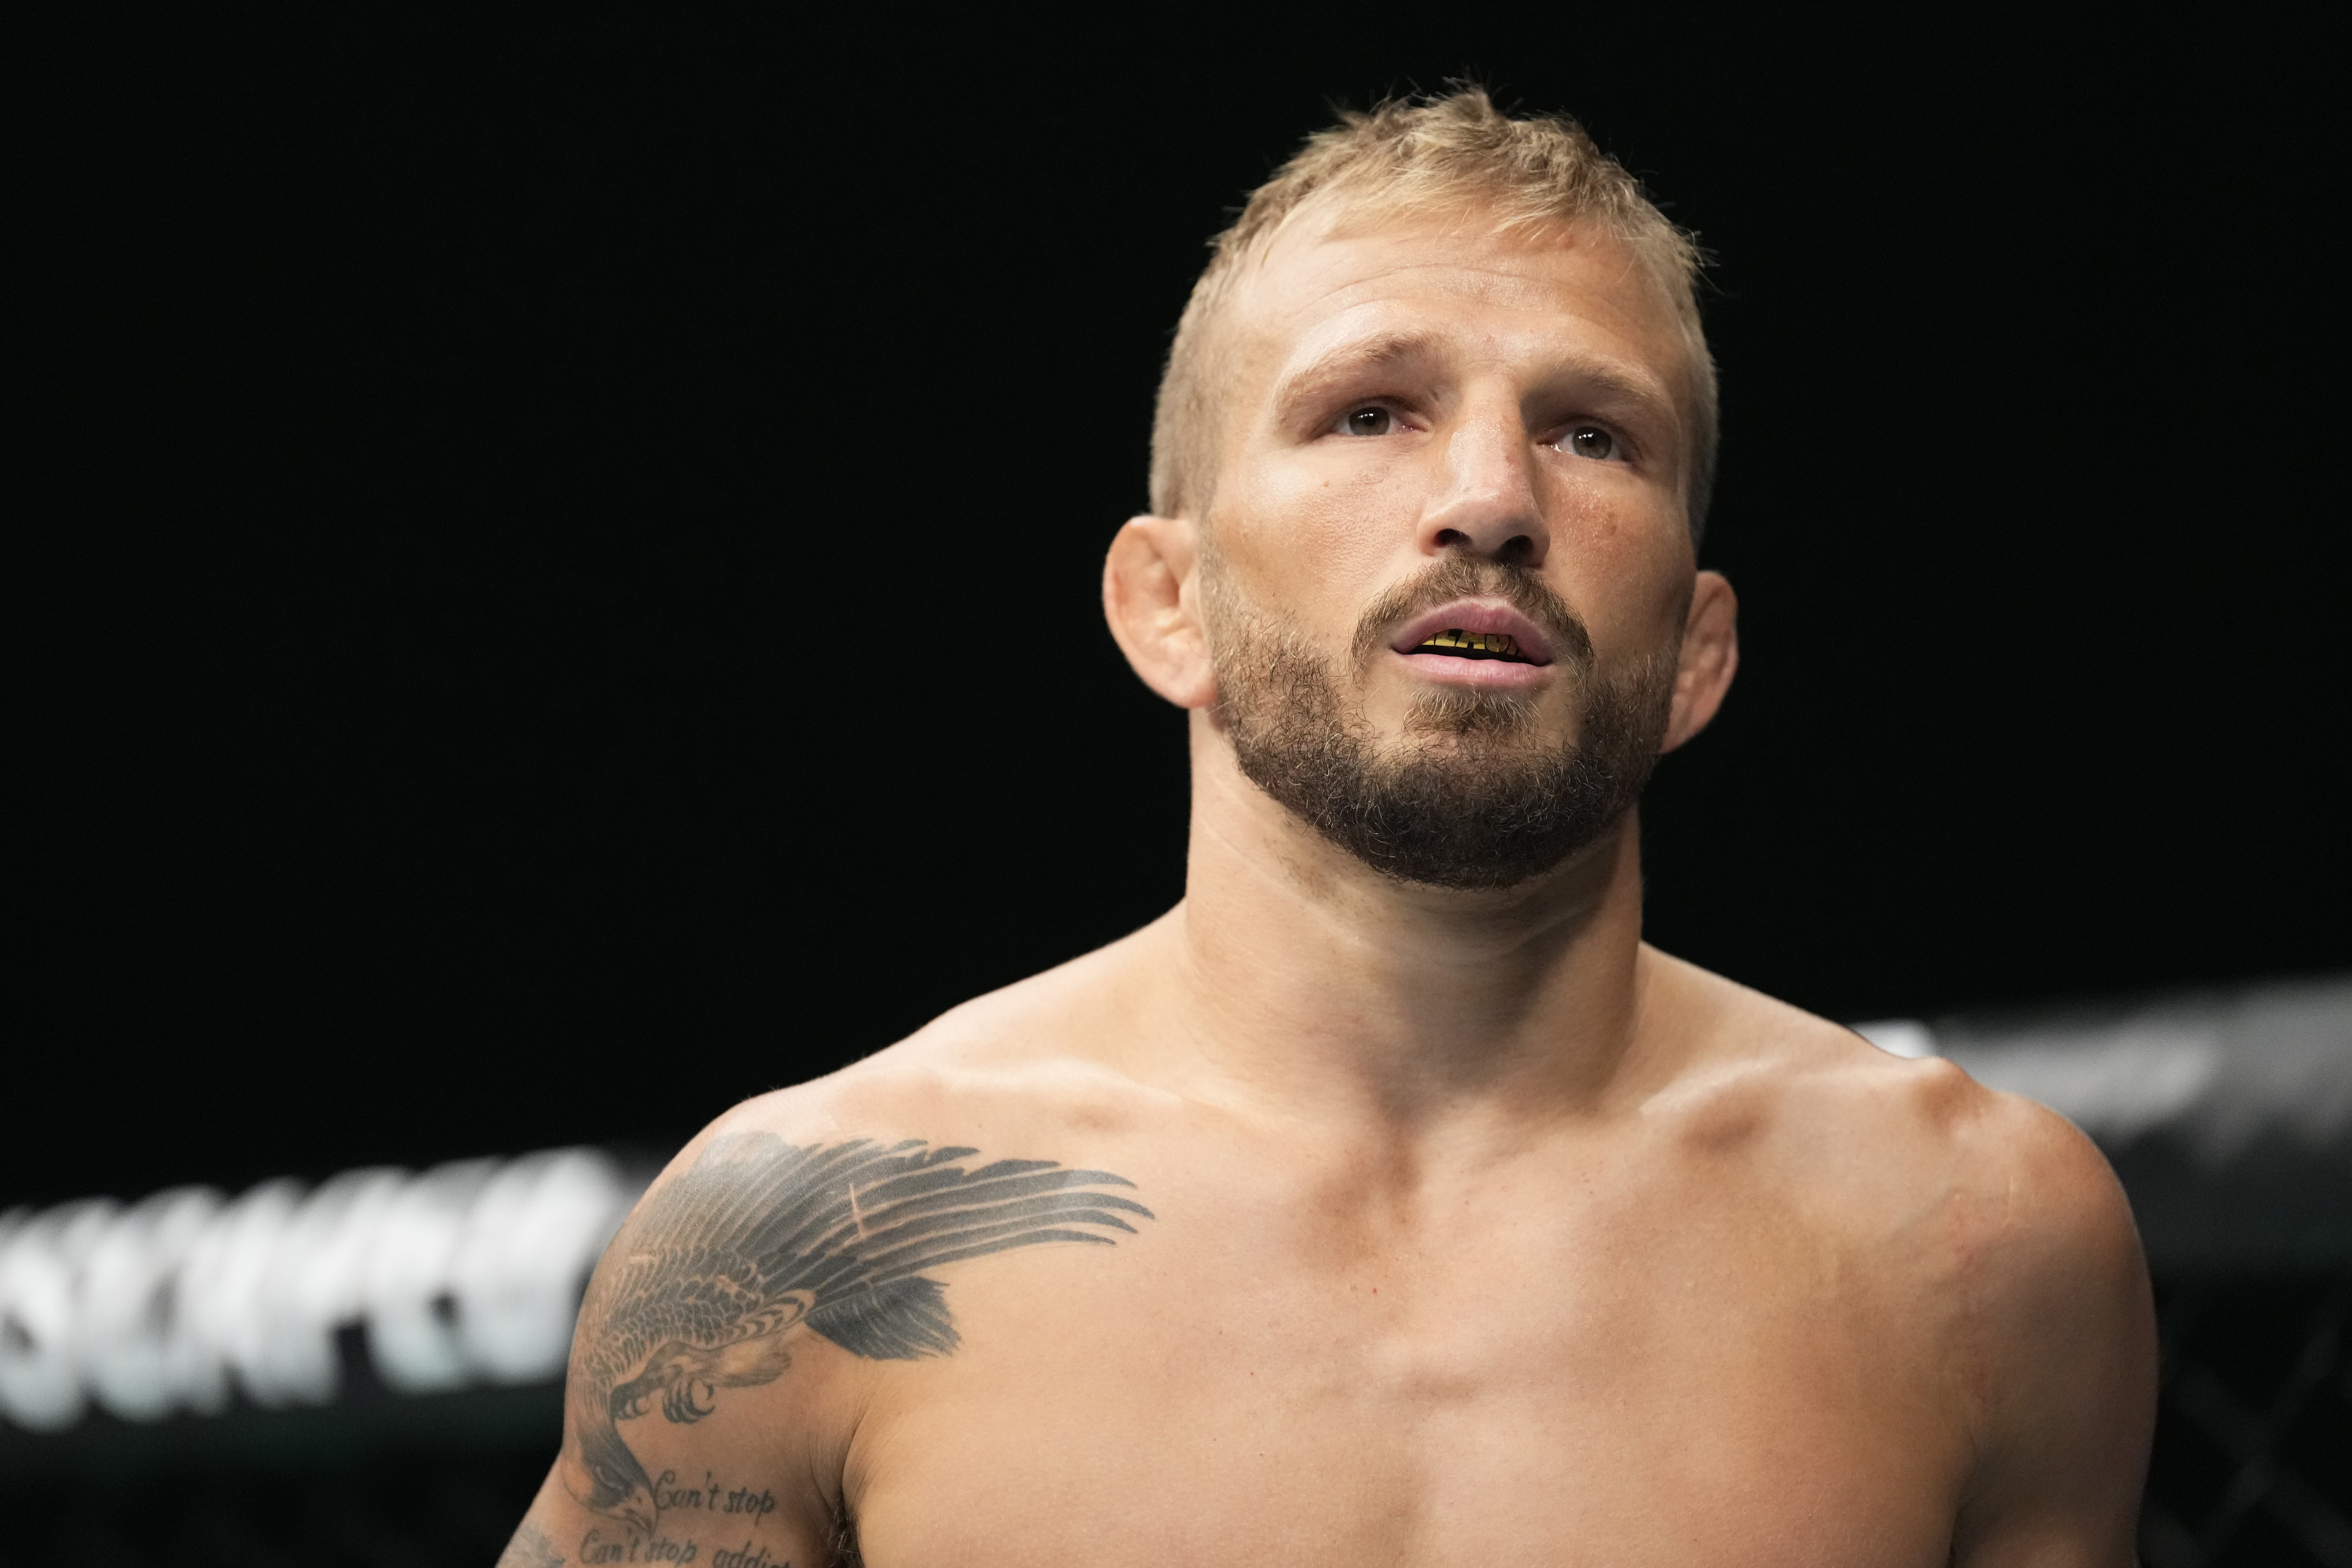 TJ Dillashaw has been removed from the UFC rankings